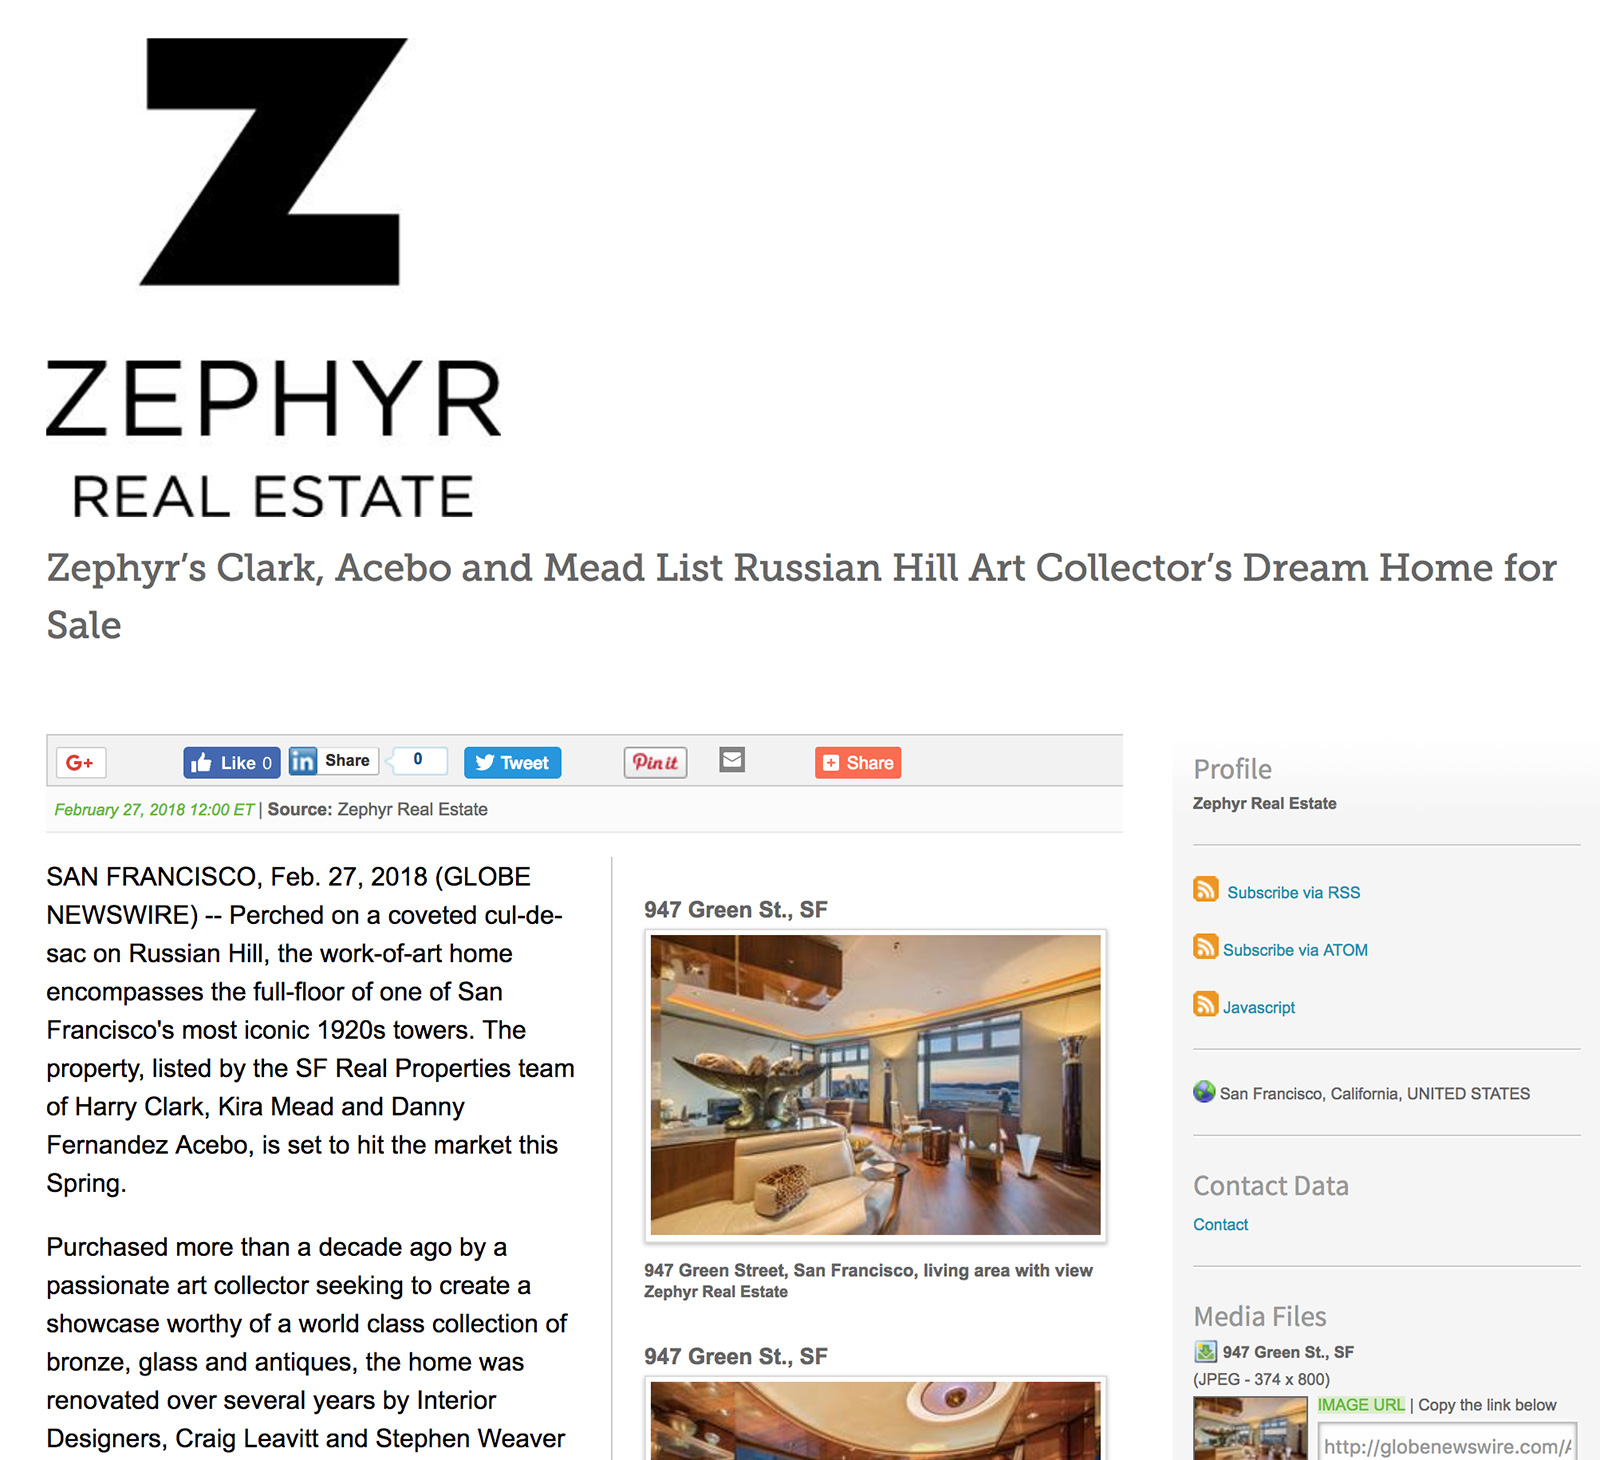 Zephyr’s Clark, Acebo and Mead List Russian Hill Art Collector’s Dream Home for Sale